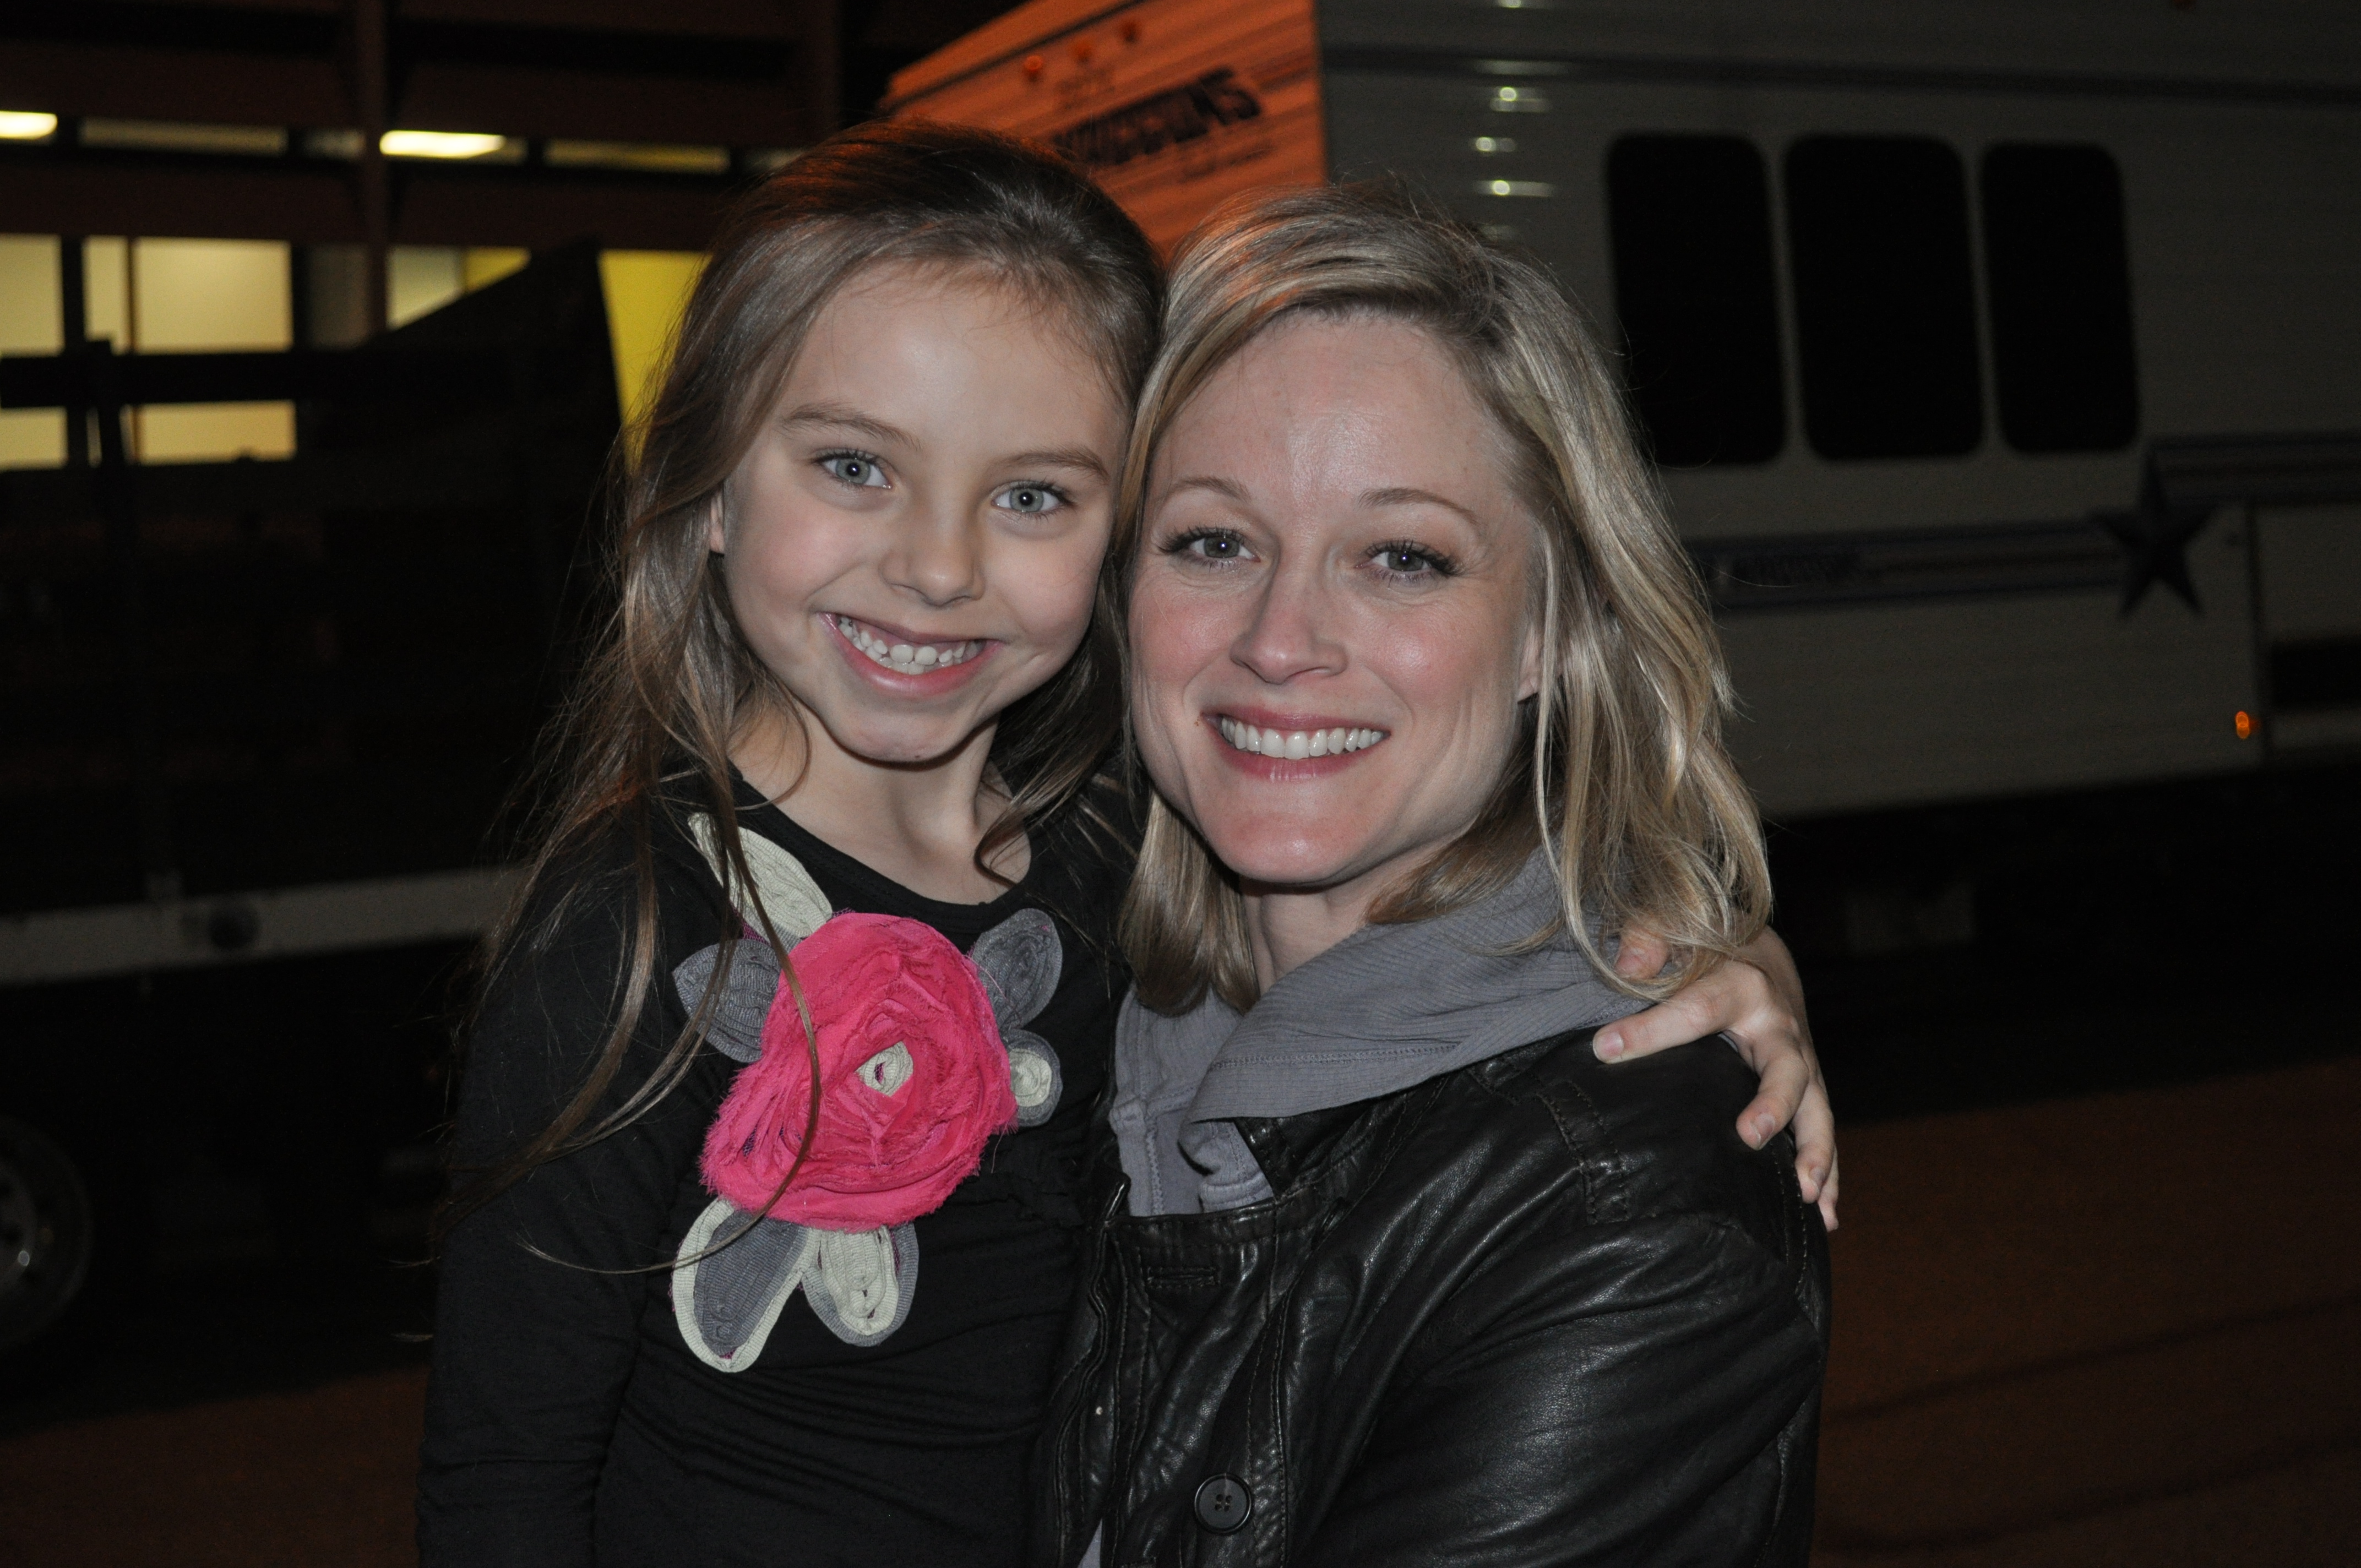 Caitlin Carmichael and Teri Polo on set of Law & Order: Los Angeles February 2011